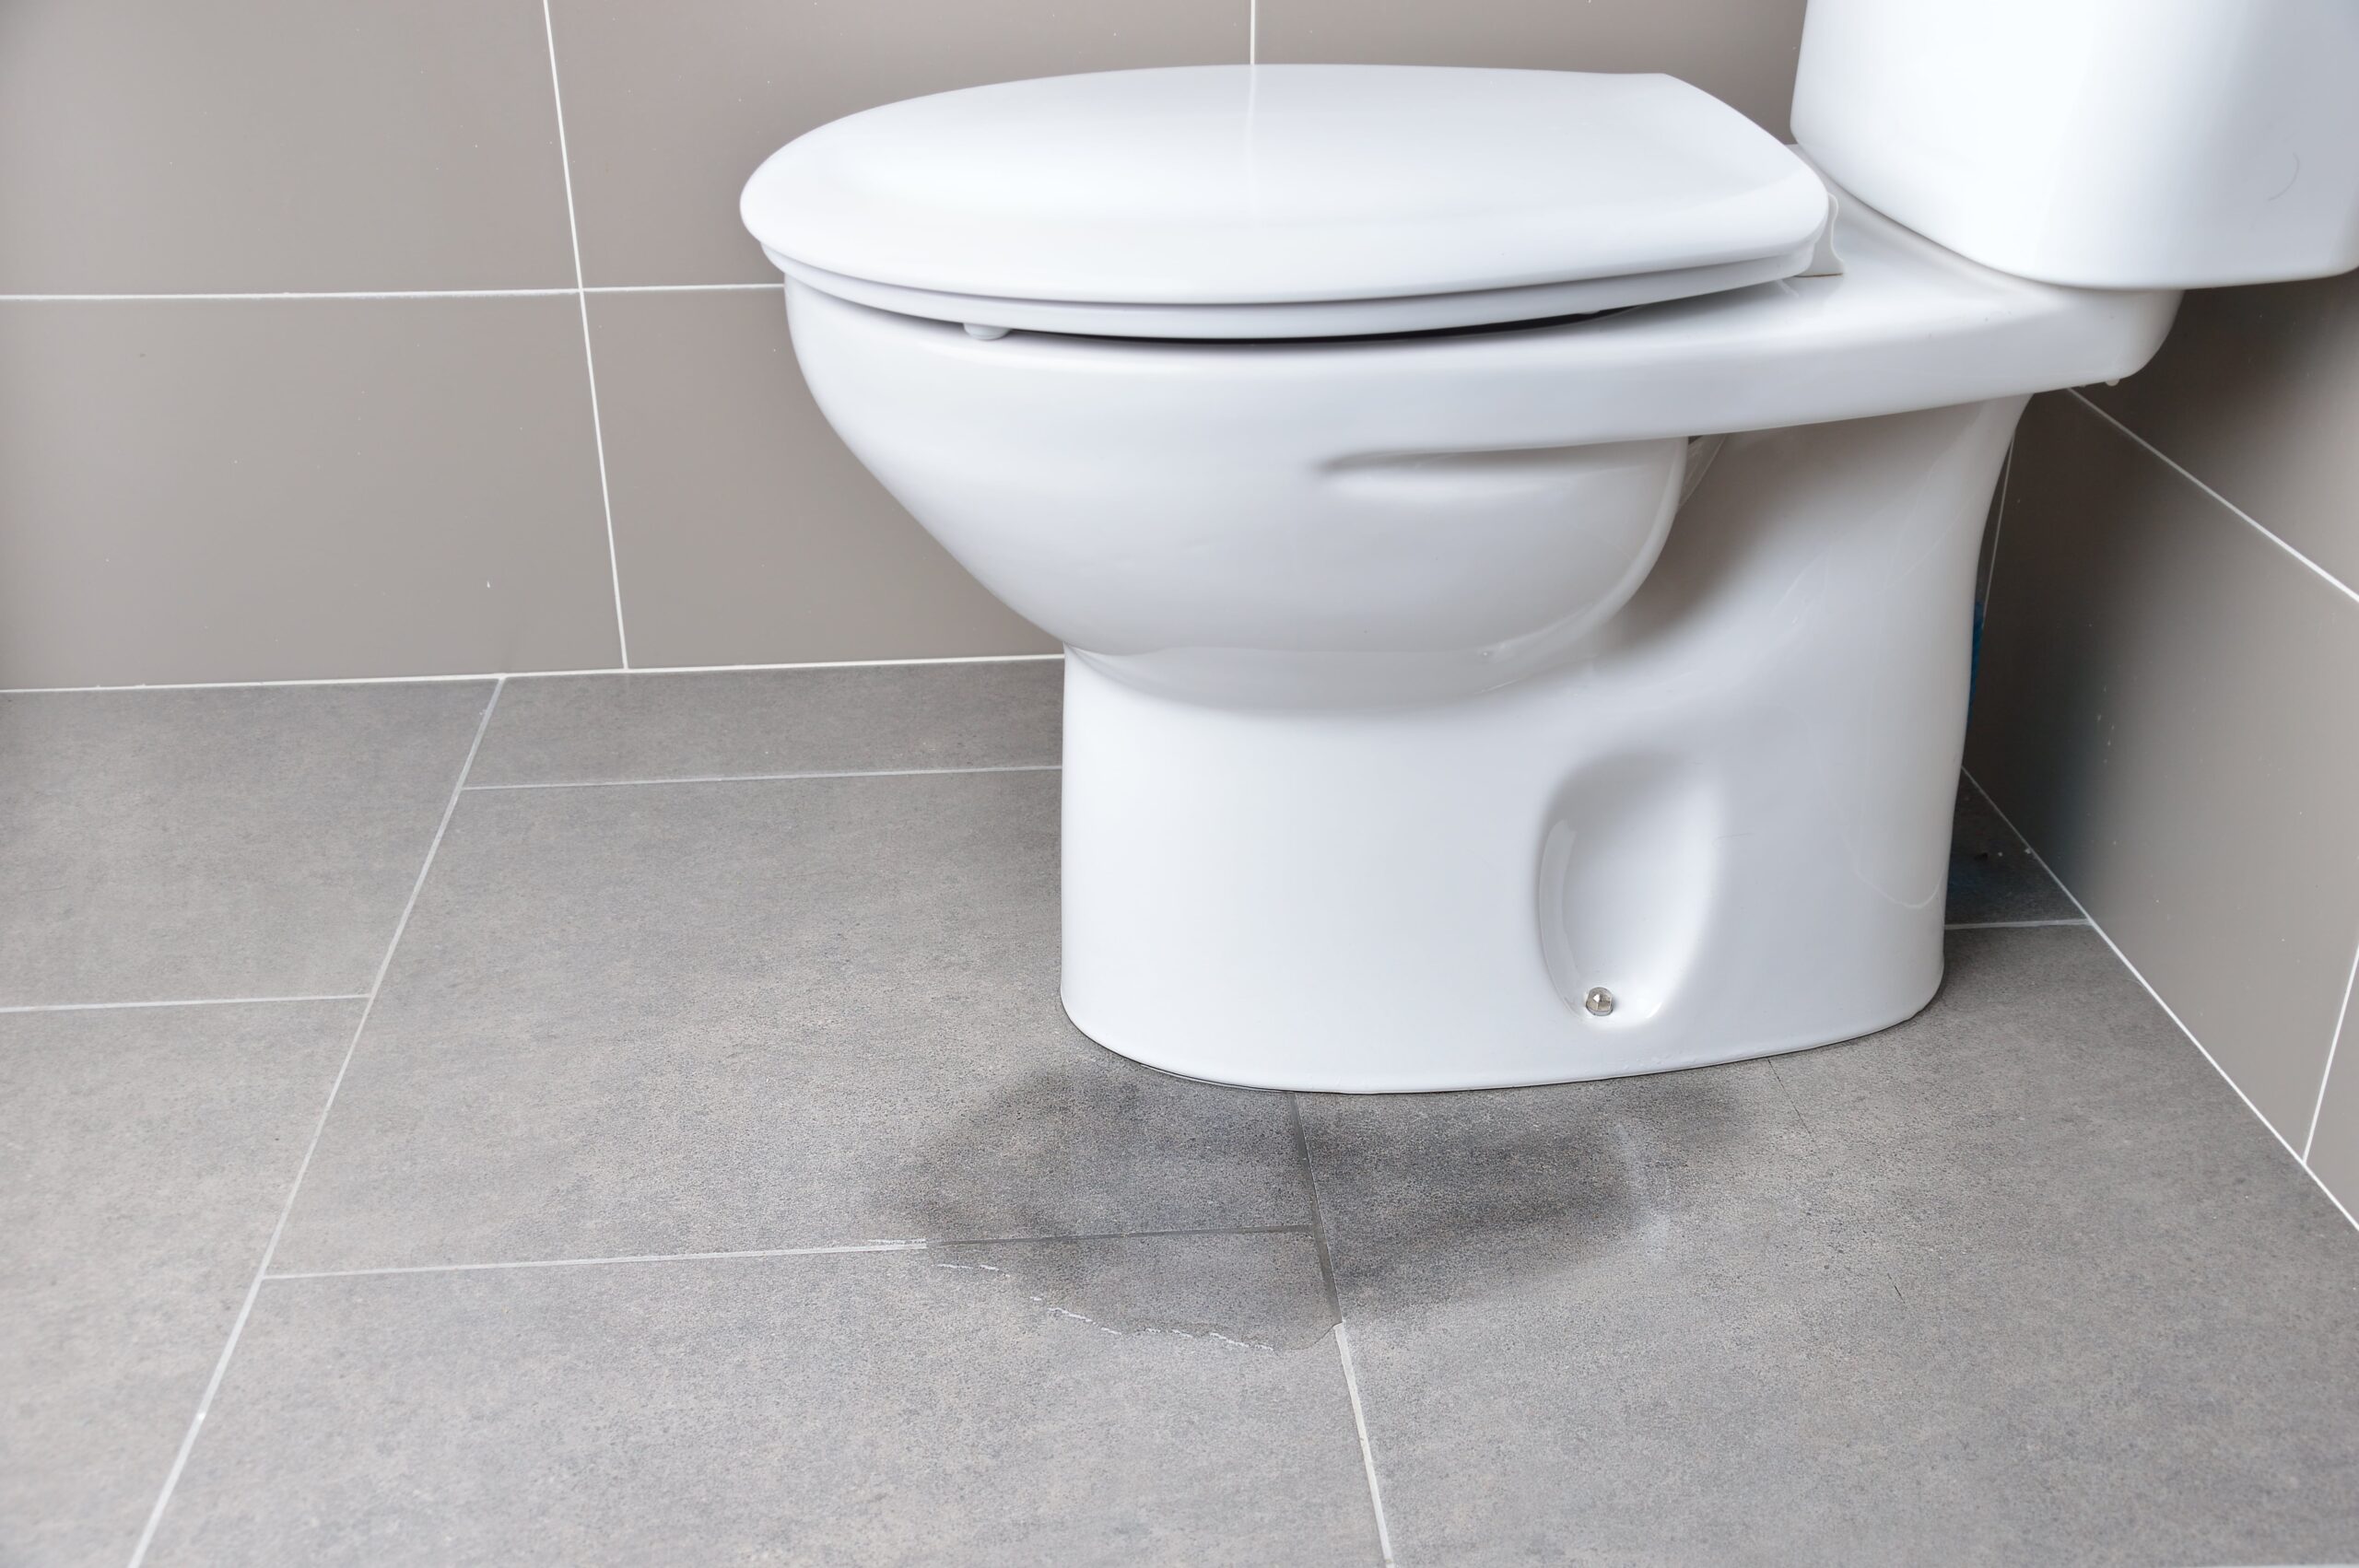 Top Signs You Need Bathroom Leak Repairs: Identifying and Addressing Hidden Plumbing Issues